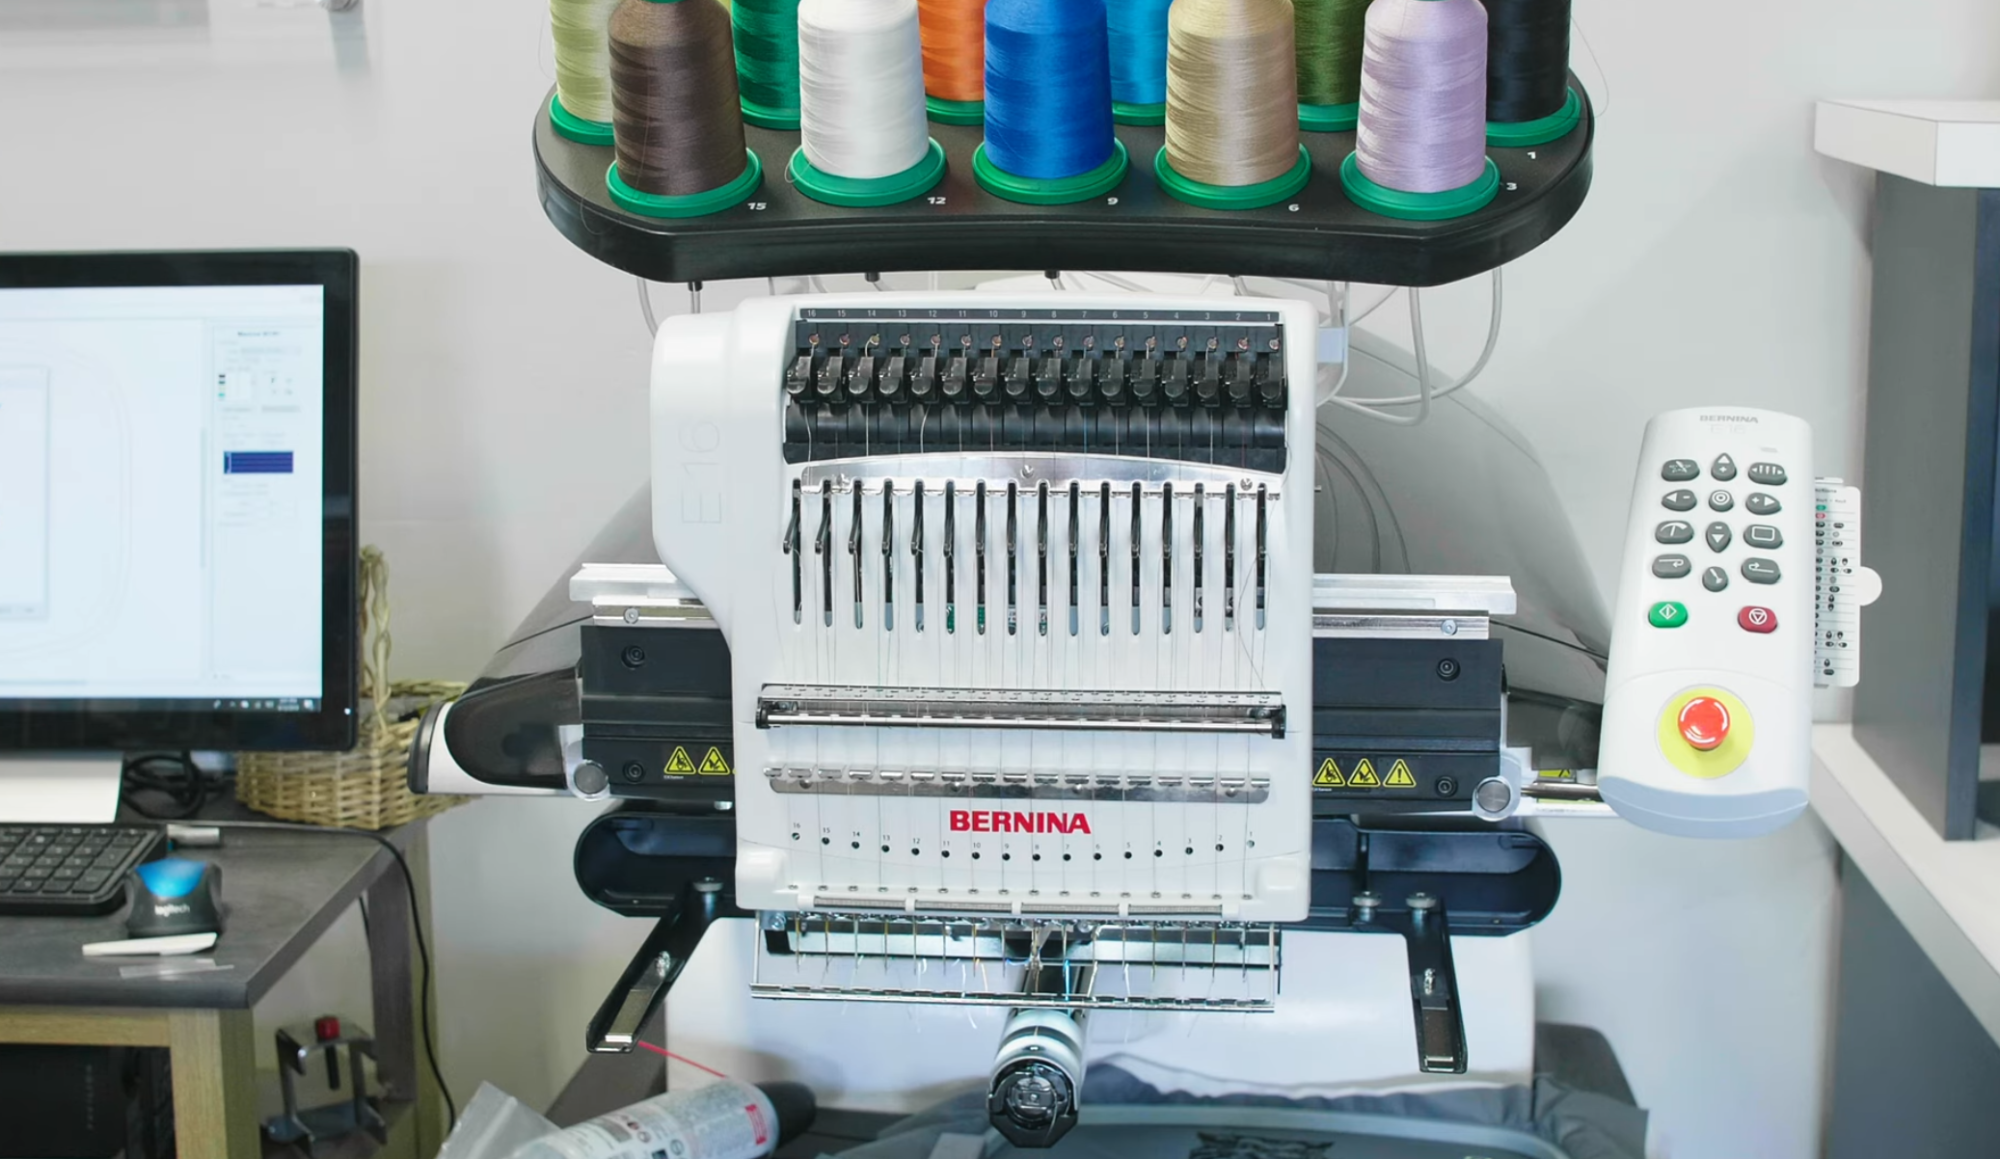 Best commercial embroidery machine for hats